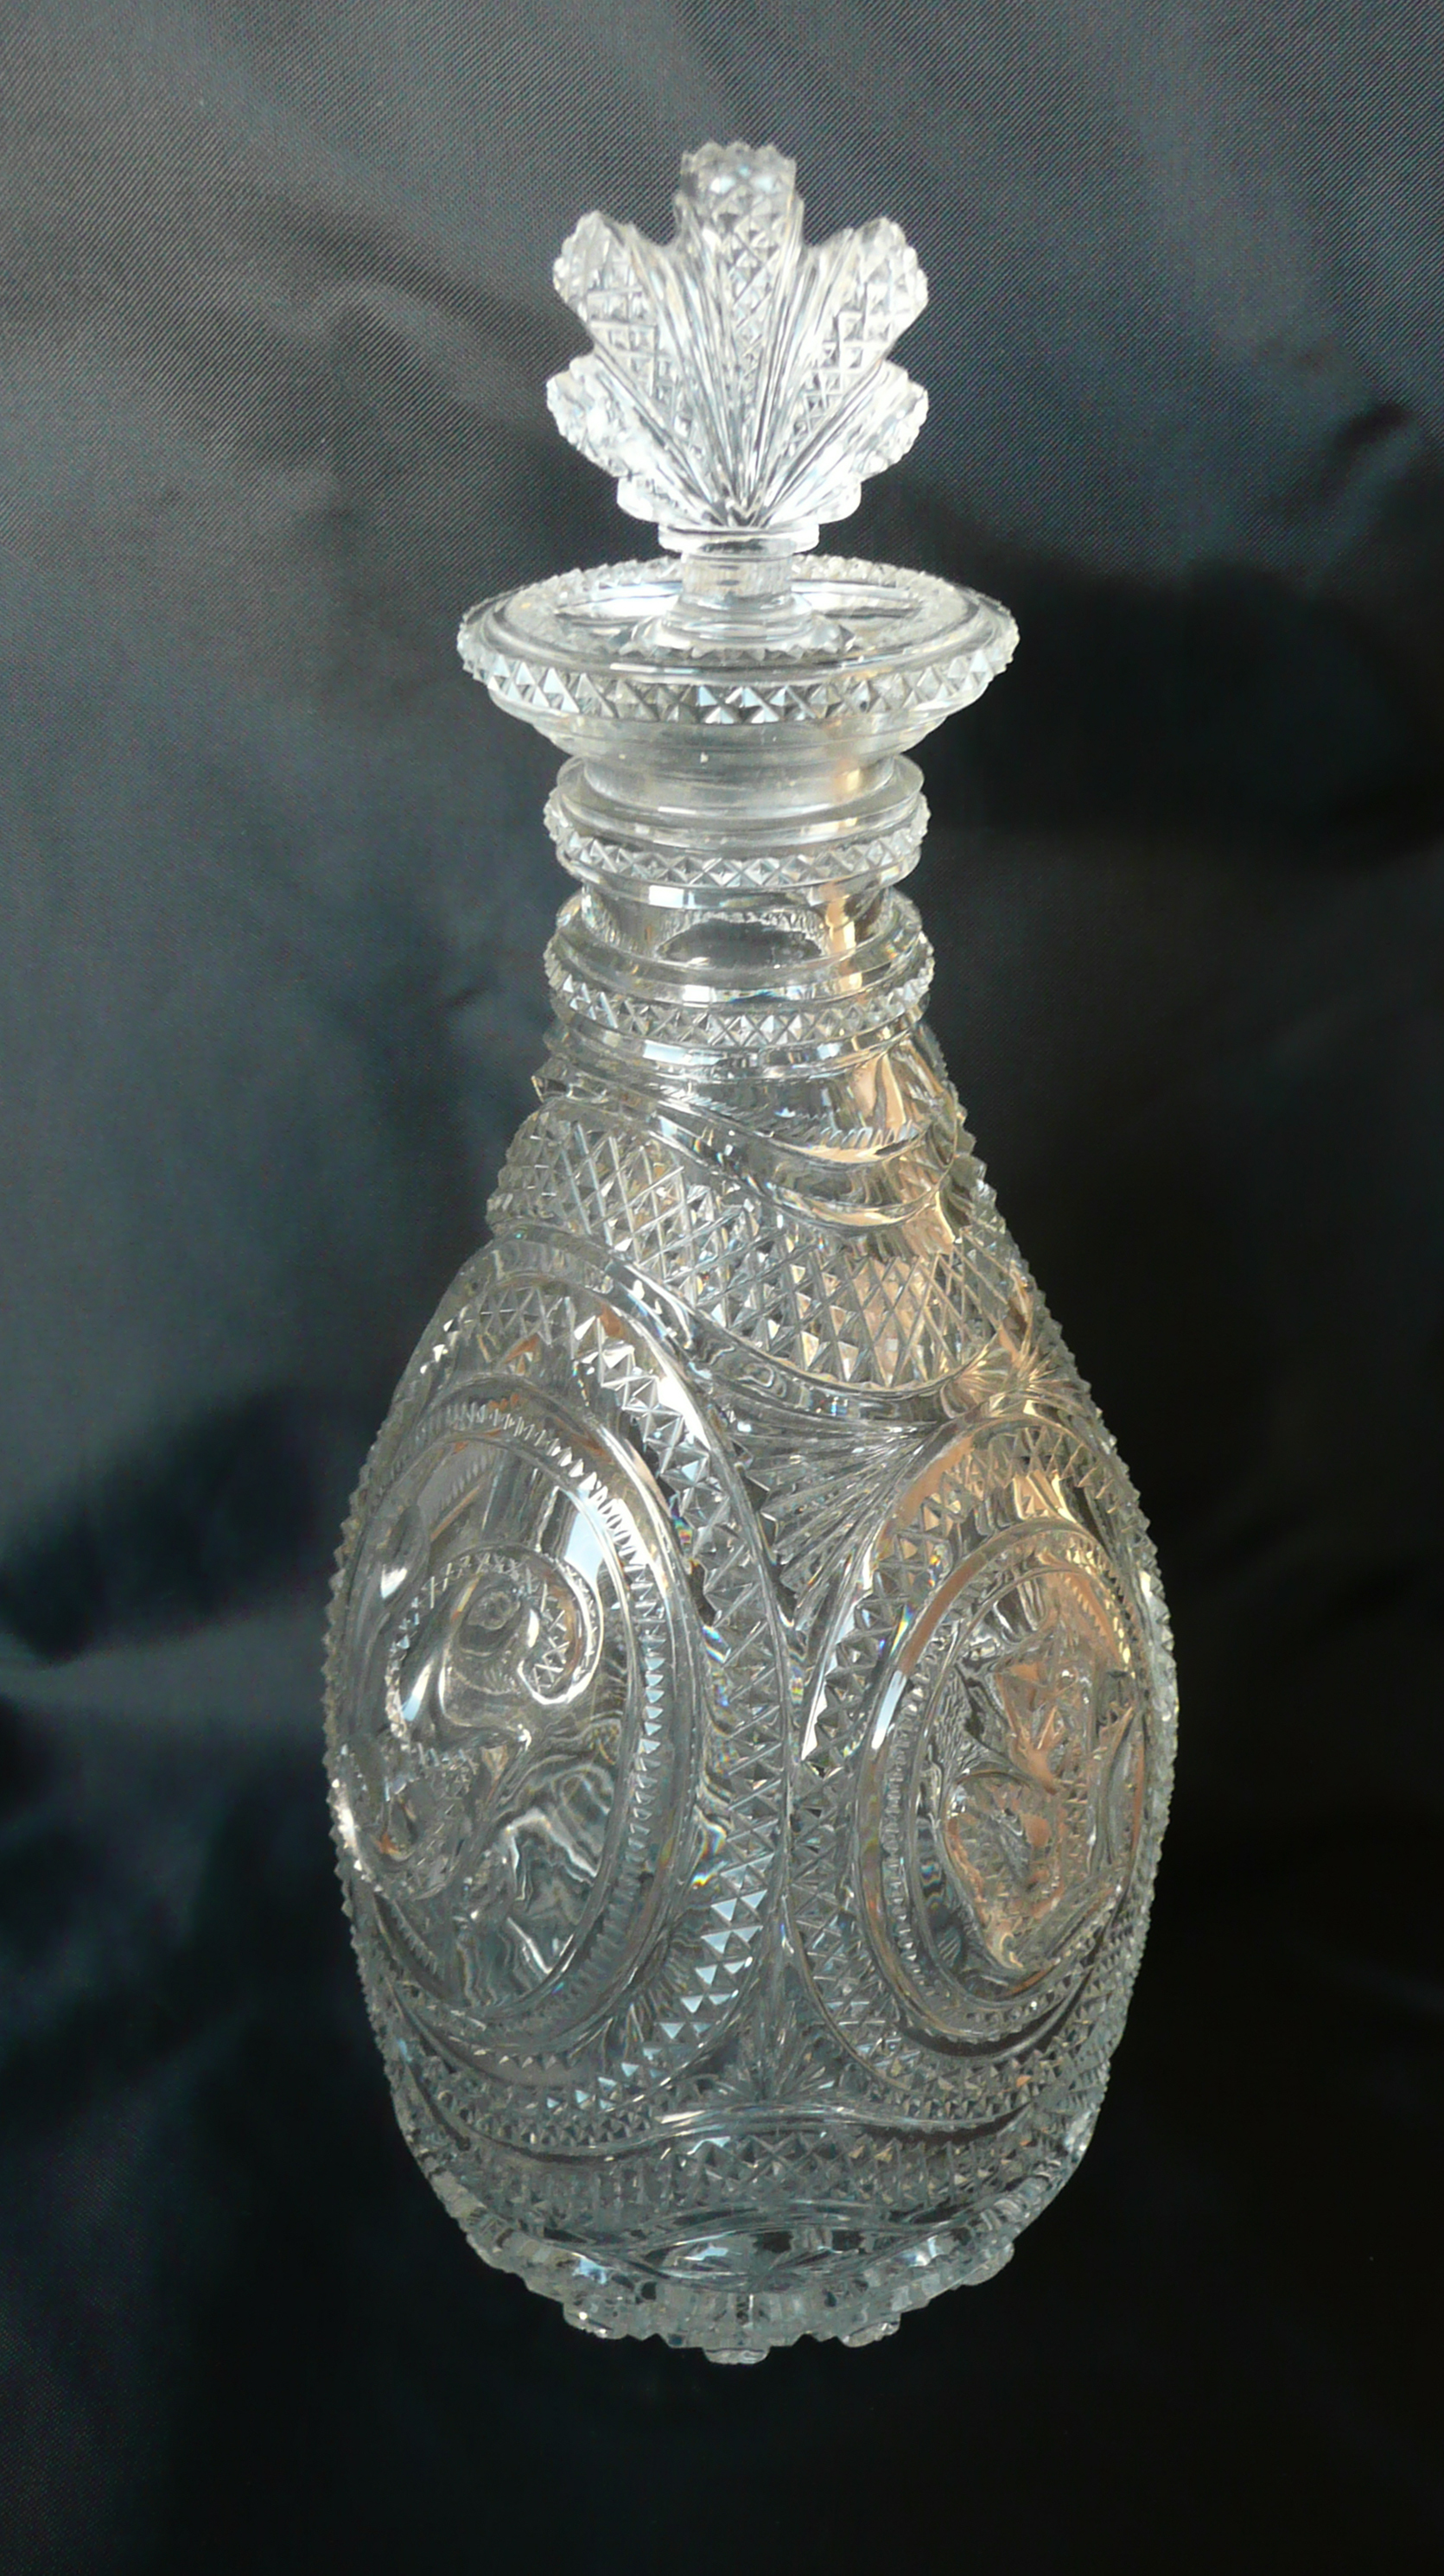 George, Prince of Wales: a fine quality and extraordinarily heavy Regency hobnail cut glass decanter - Image 6 of 7